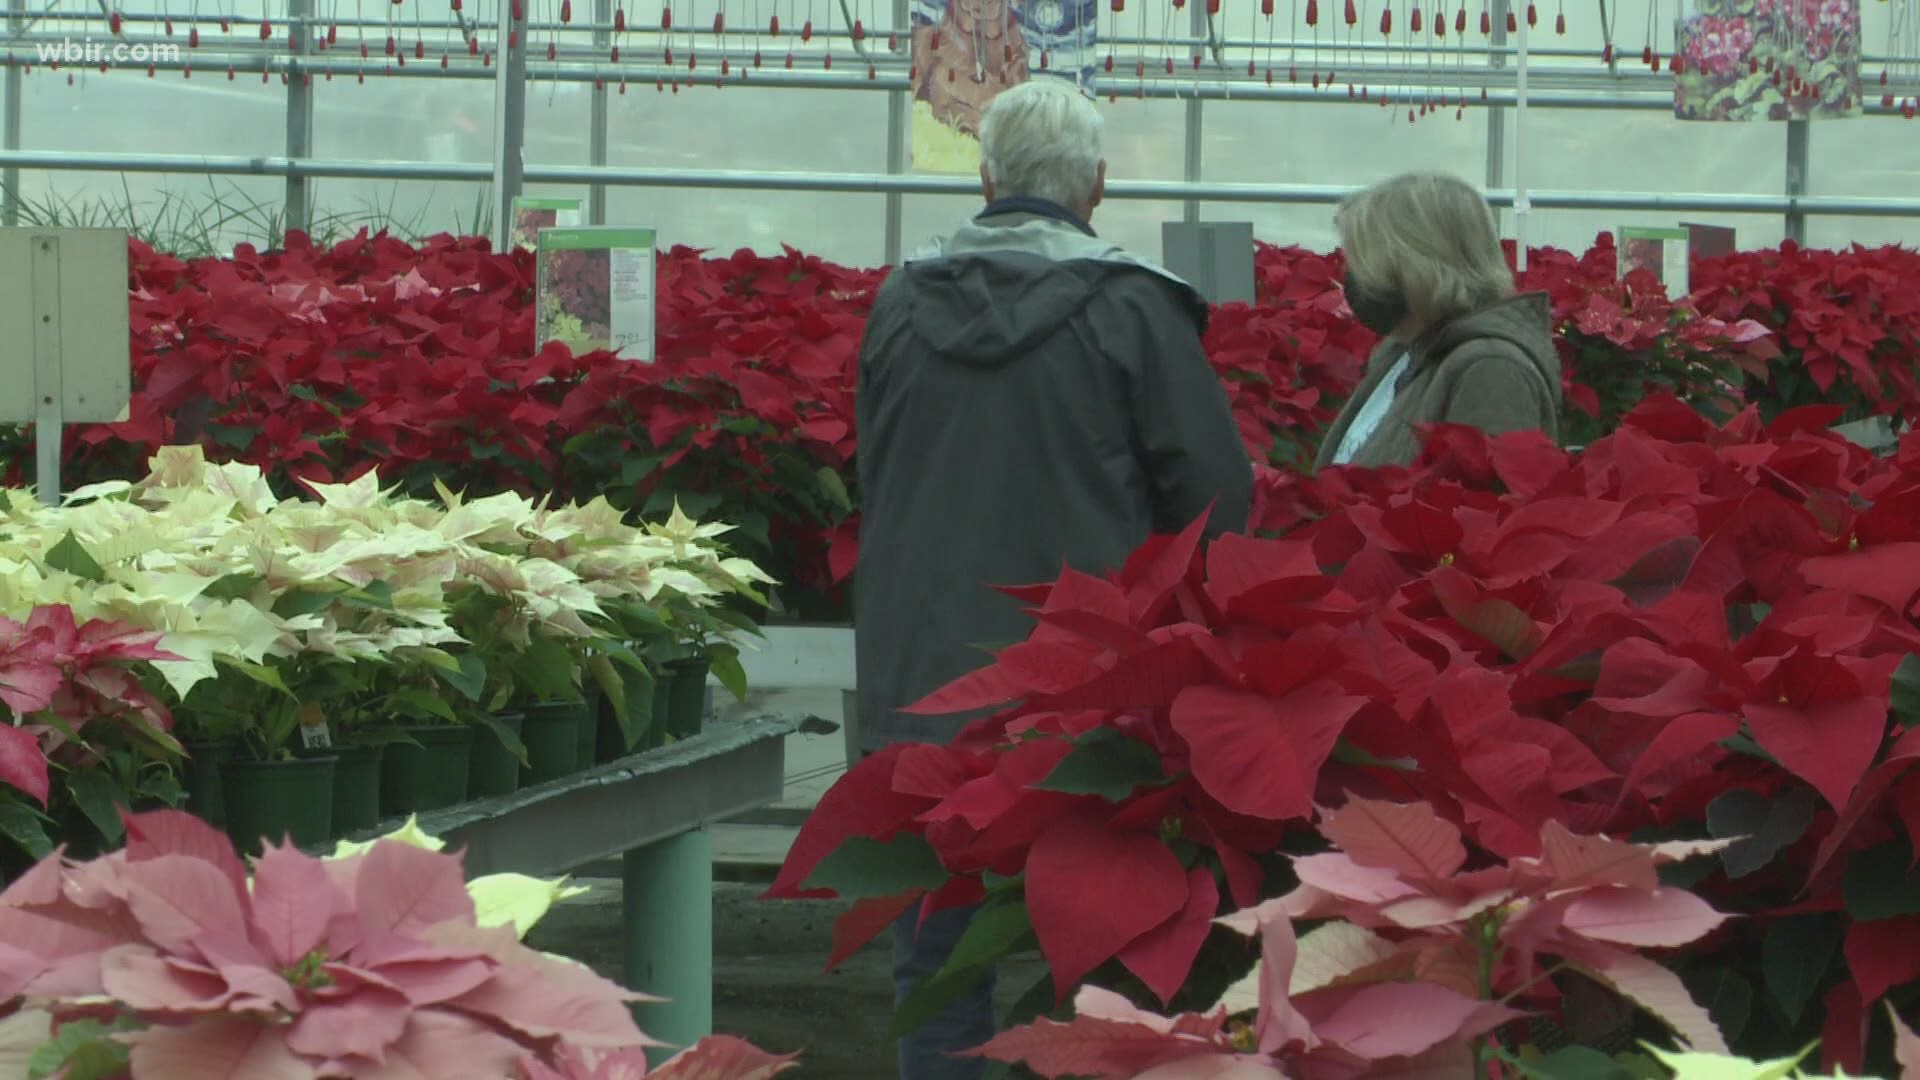 Despite the myth, poinsettias are not poisonous. It is best to keep them away from pets if you can.